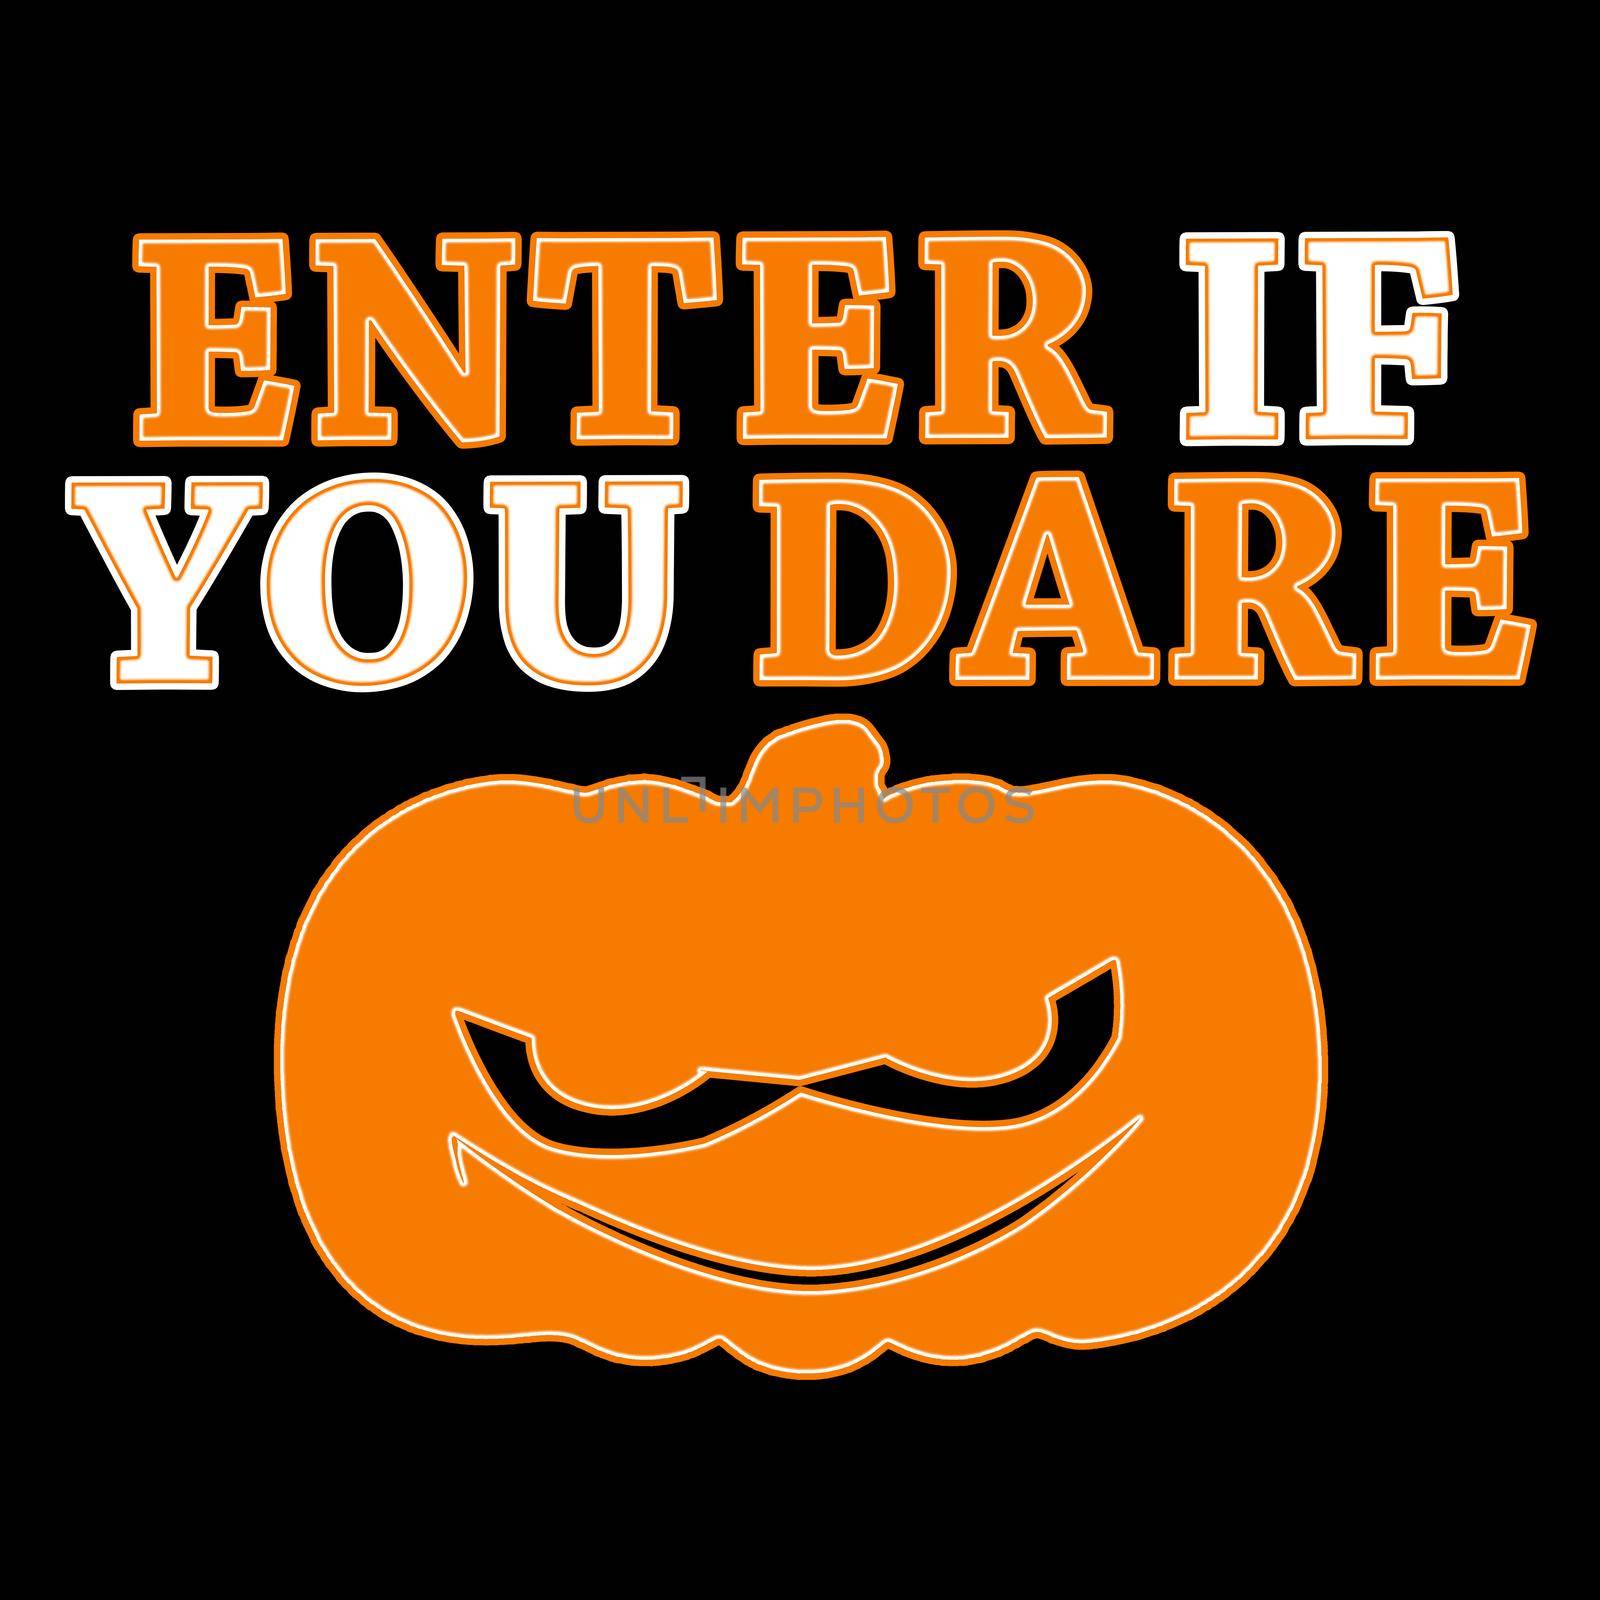 A halloween sign with the text "Enter if you dare".